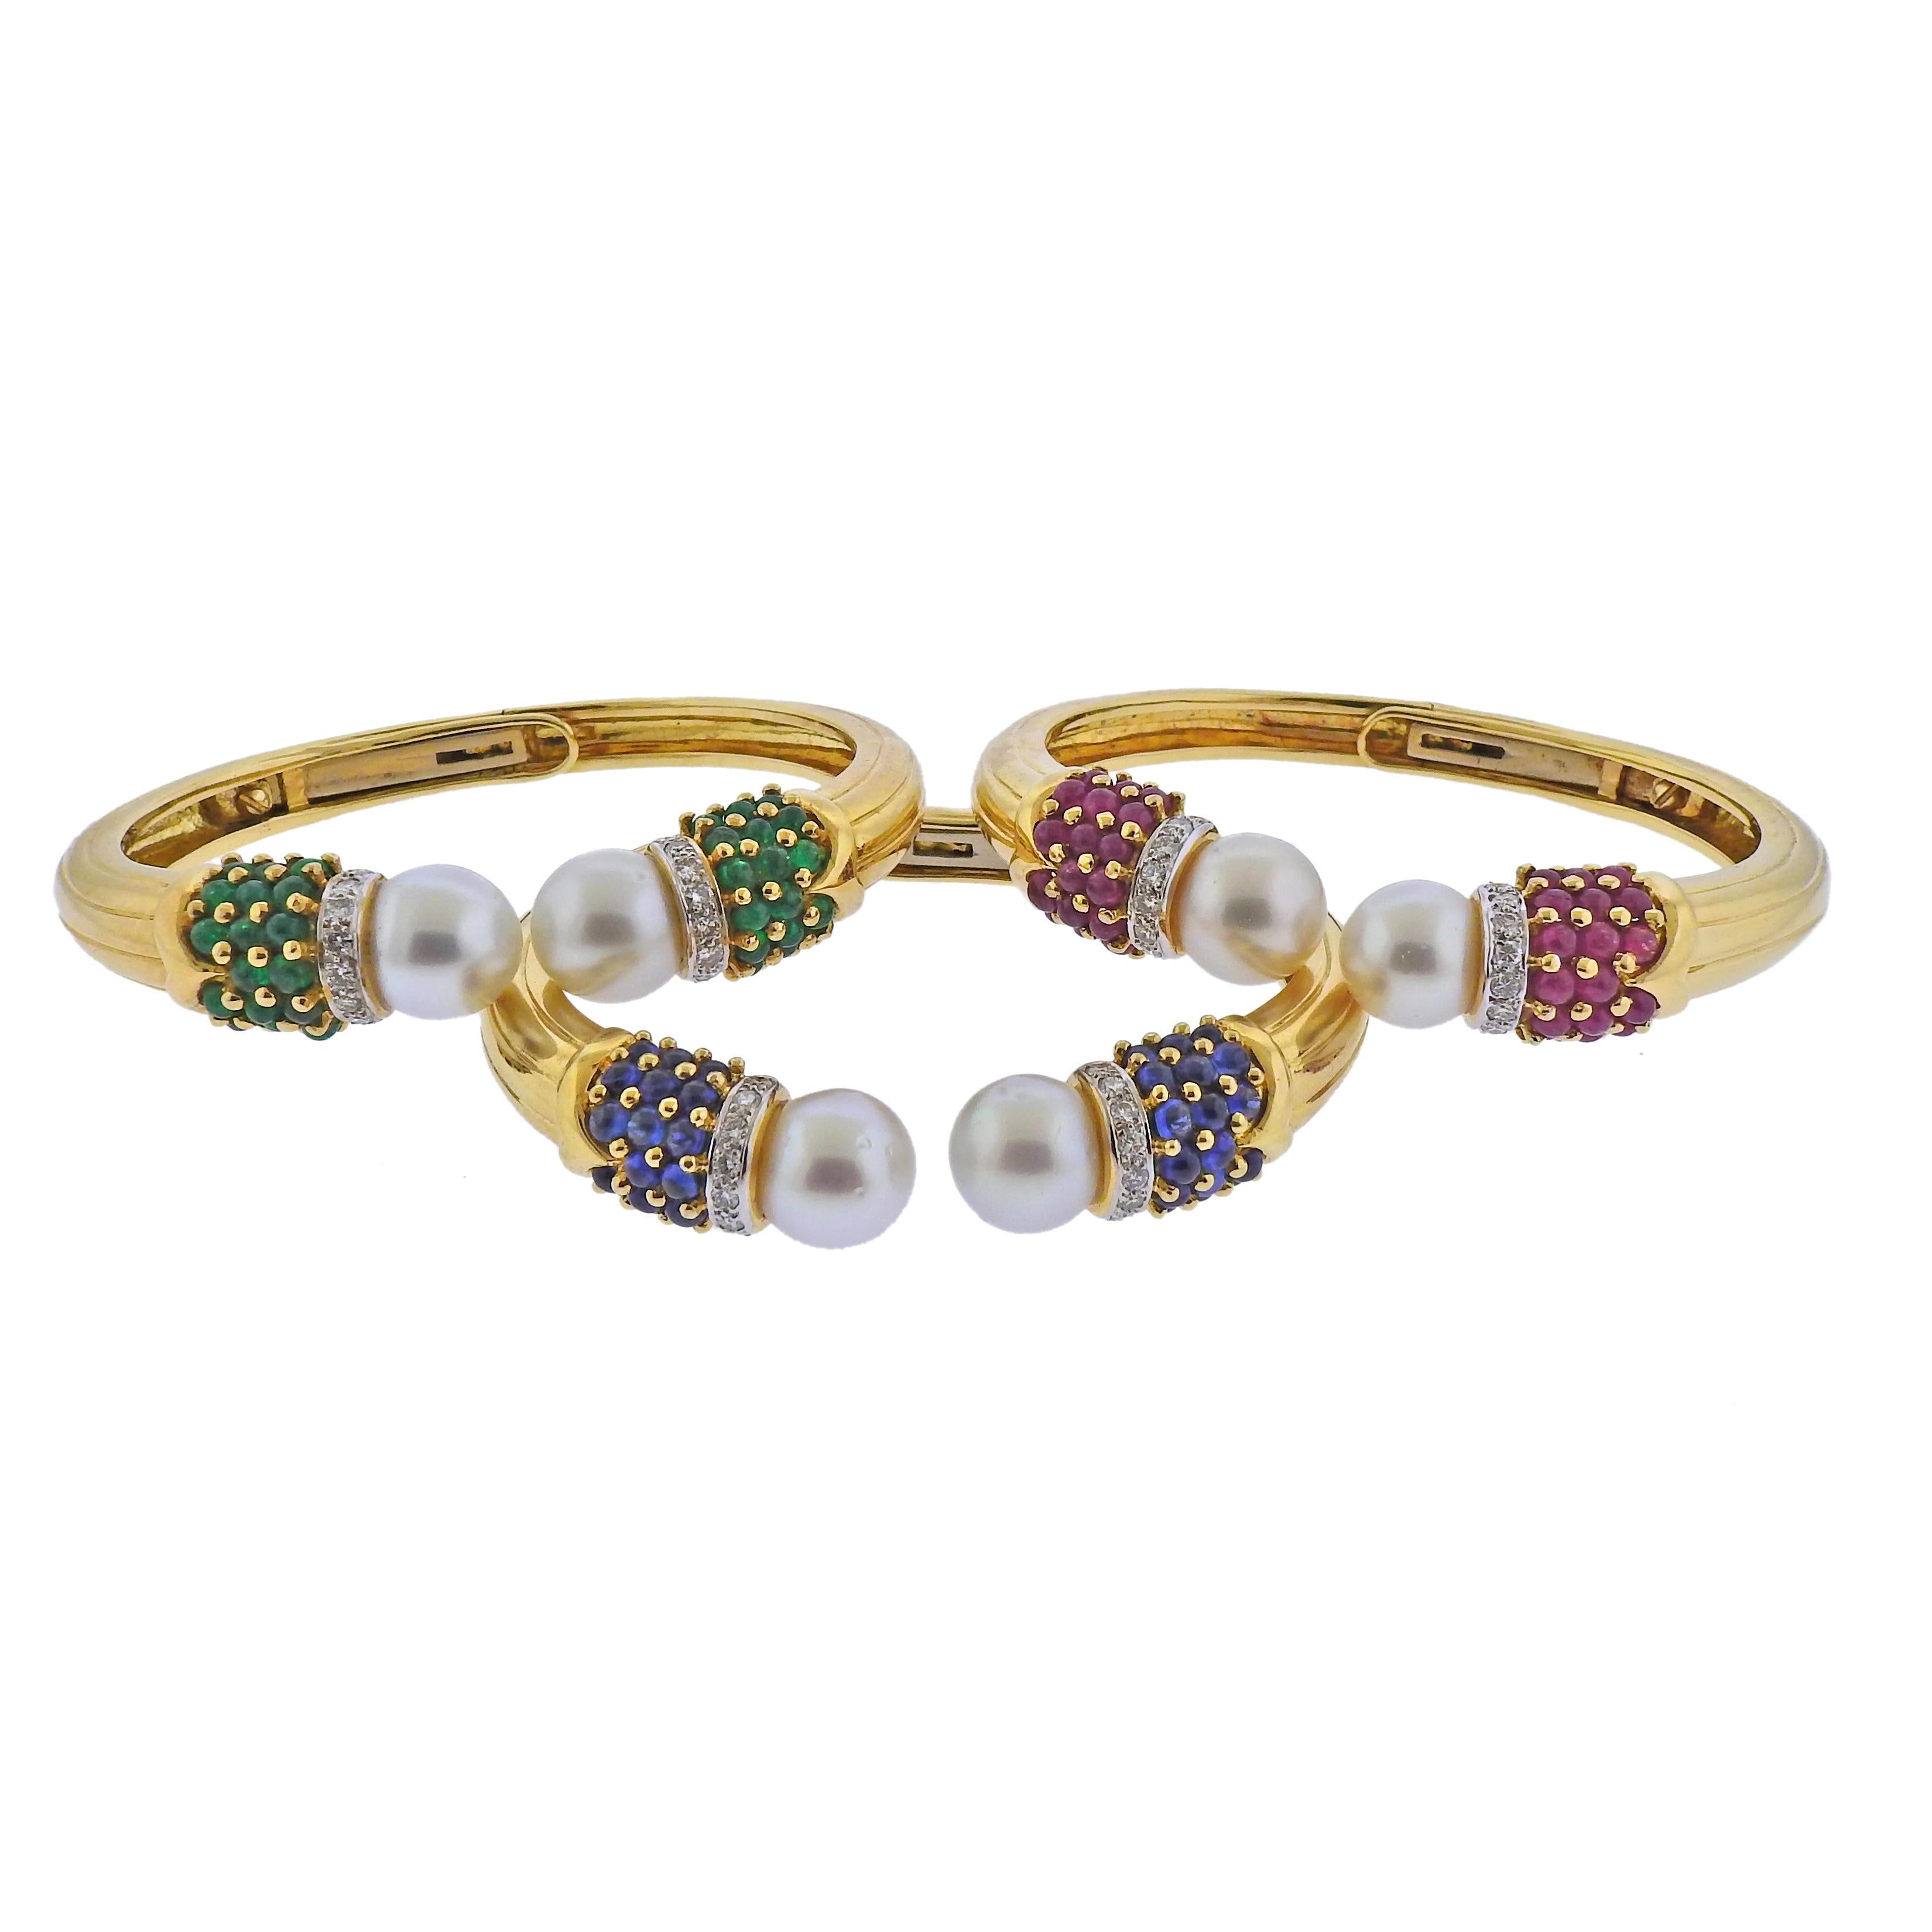 Set of three bangle bracelets in 18k yellow gold, set with emeralds, rubies, sapphires approx. 1.08ctw in H/VS-SI diamonds total and 11.2-11.7mm South Sea pearls. Each bracelet will fit approx. 6.75-7